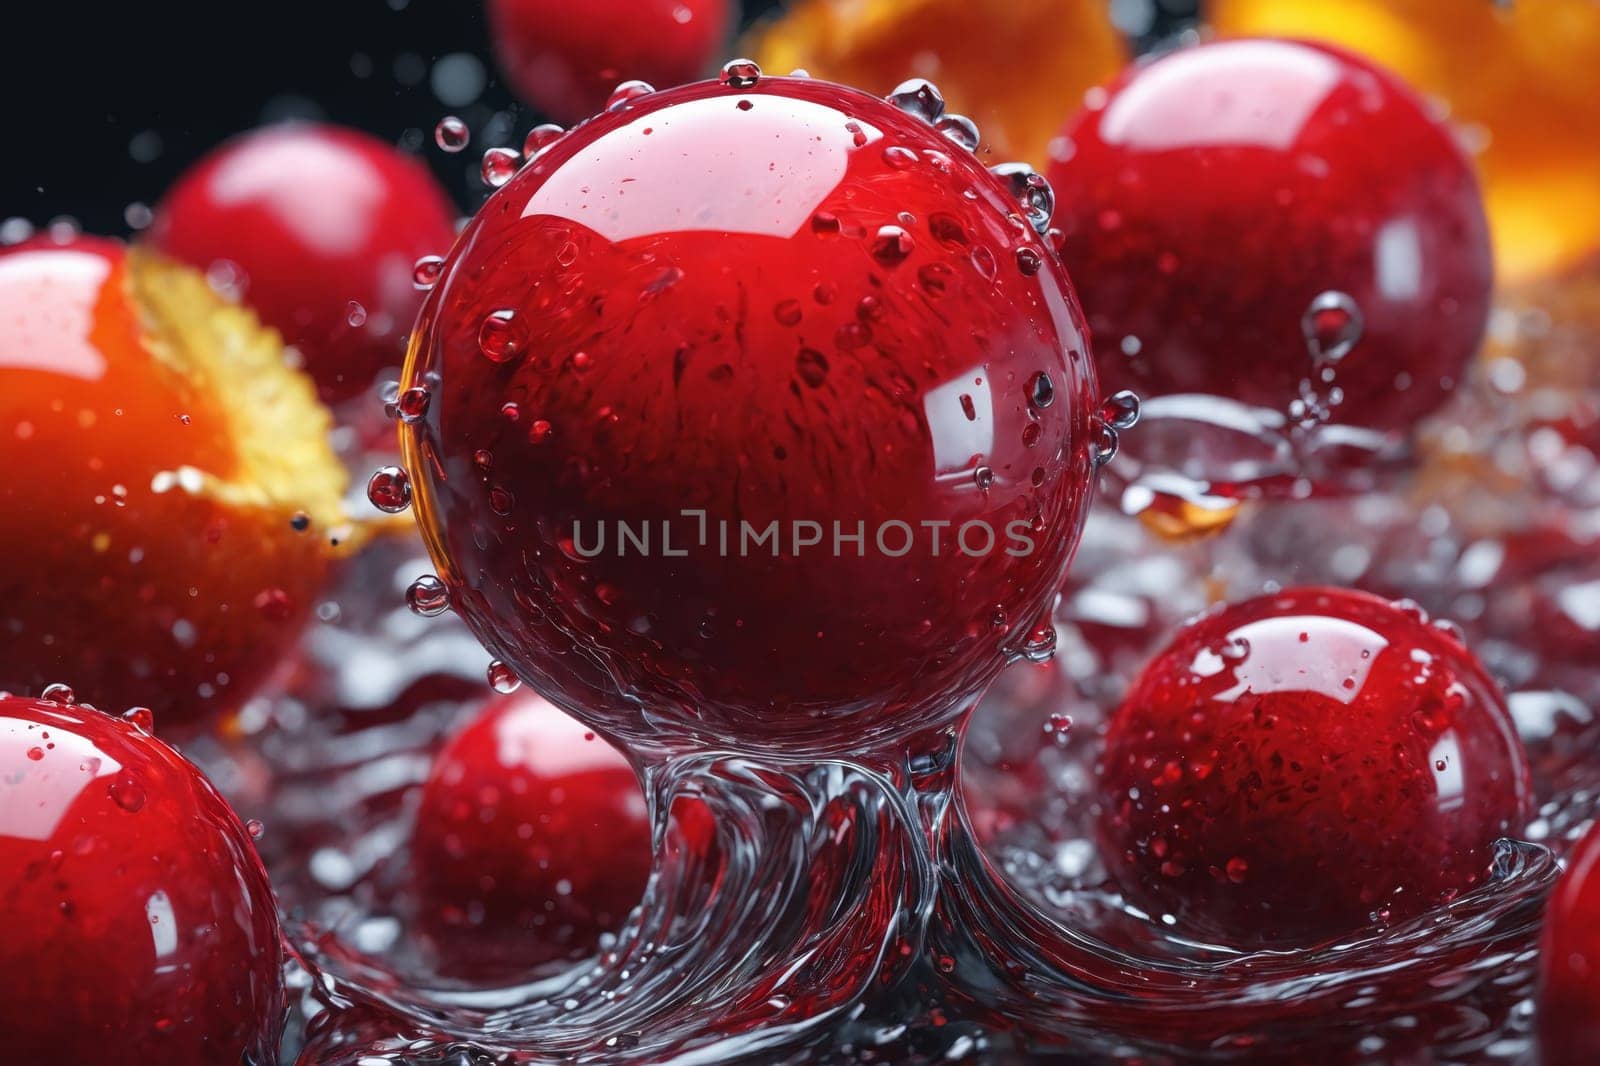 Dewy Red Spheres: A Close-Up Against a Sunny Yellow Backdrop by Andre1ns